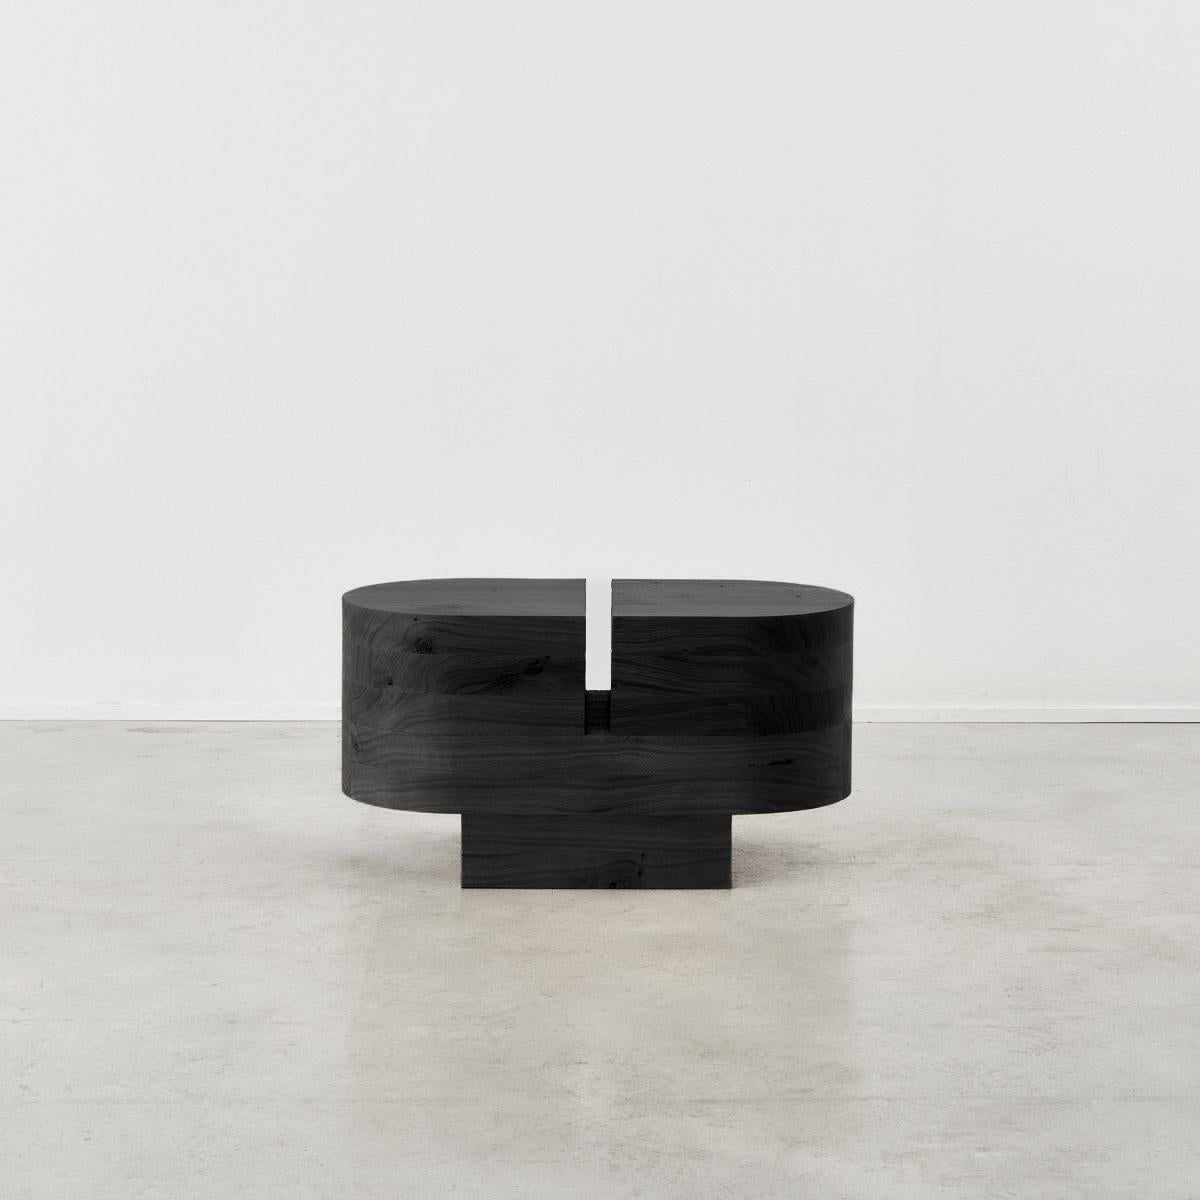 Edition of 8 + 1AP

‘Low Bench For Two’ is a new work by architect, designer and maker Benni Allan exploring different ways of sitting. Part of his first full collection of furniture, Low Collection, exclusive to Béton Brut. And was inspired by